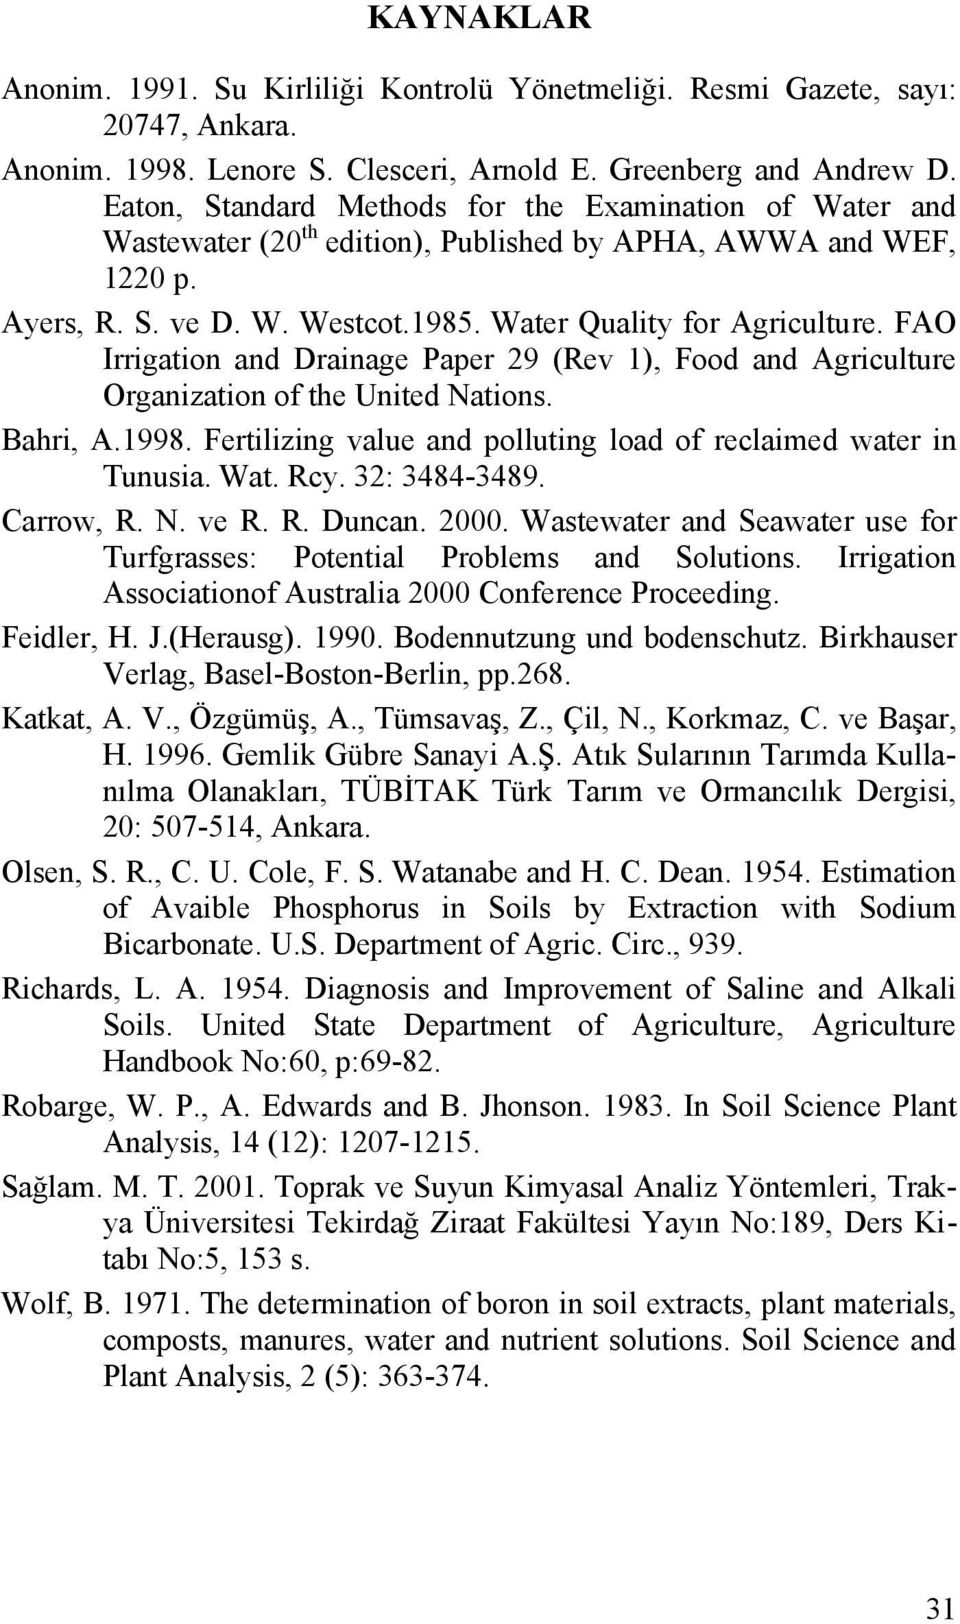 FAO Irrigation and Drainage Paper 29 (Rev 1), Food and Agriculture Organization of the United Nations. Bahri, A.1998. Fertilizing value and polluting load of reclaimed water in Tunusia. Wat. Rcy.